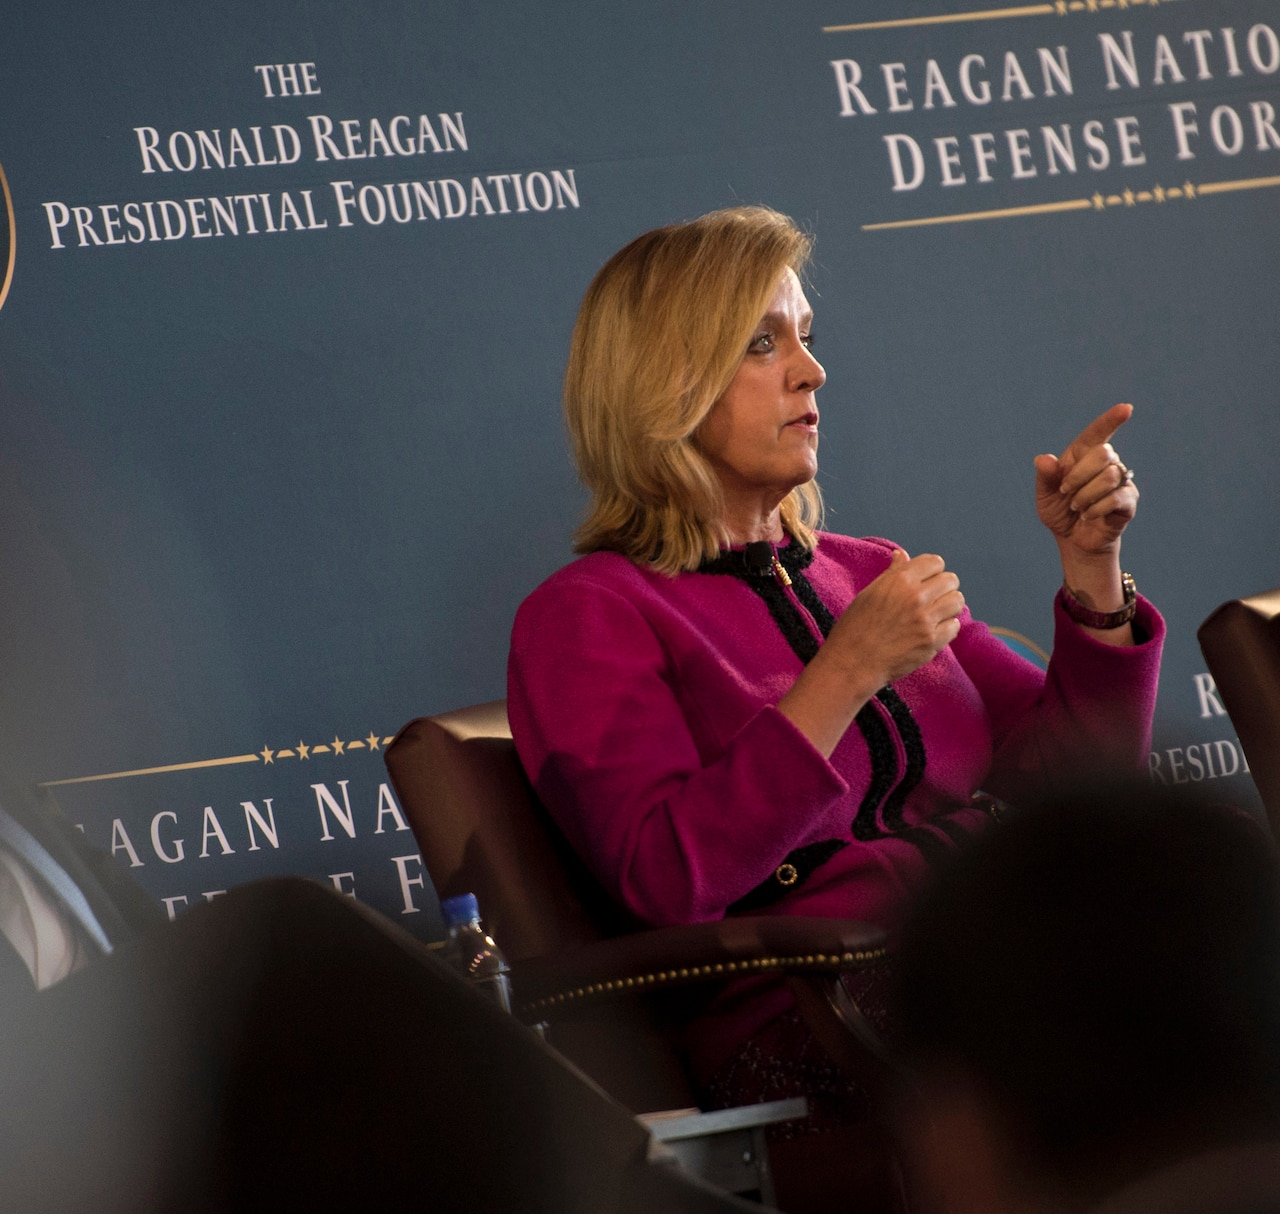 Secretary of the Air Force Deborah Lee James addresses the audience at the Reagan National Defense Forum at The Ronald Reagan Presidential Library in Simi Valley, Calif., Nov. 15, 2014. The Reagan National Defense Forum brings together leaders and key stakeholders in the defense community -- including members of Congress, civilian officials and military leaders from the Defense Department and industry -- to address the health of U.S. national defense and stimulate discussions that promote policies that strengthen the U.S. military in the future. DoD photo by Kevin O'Brien